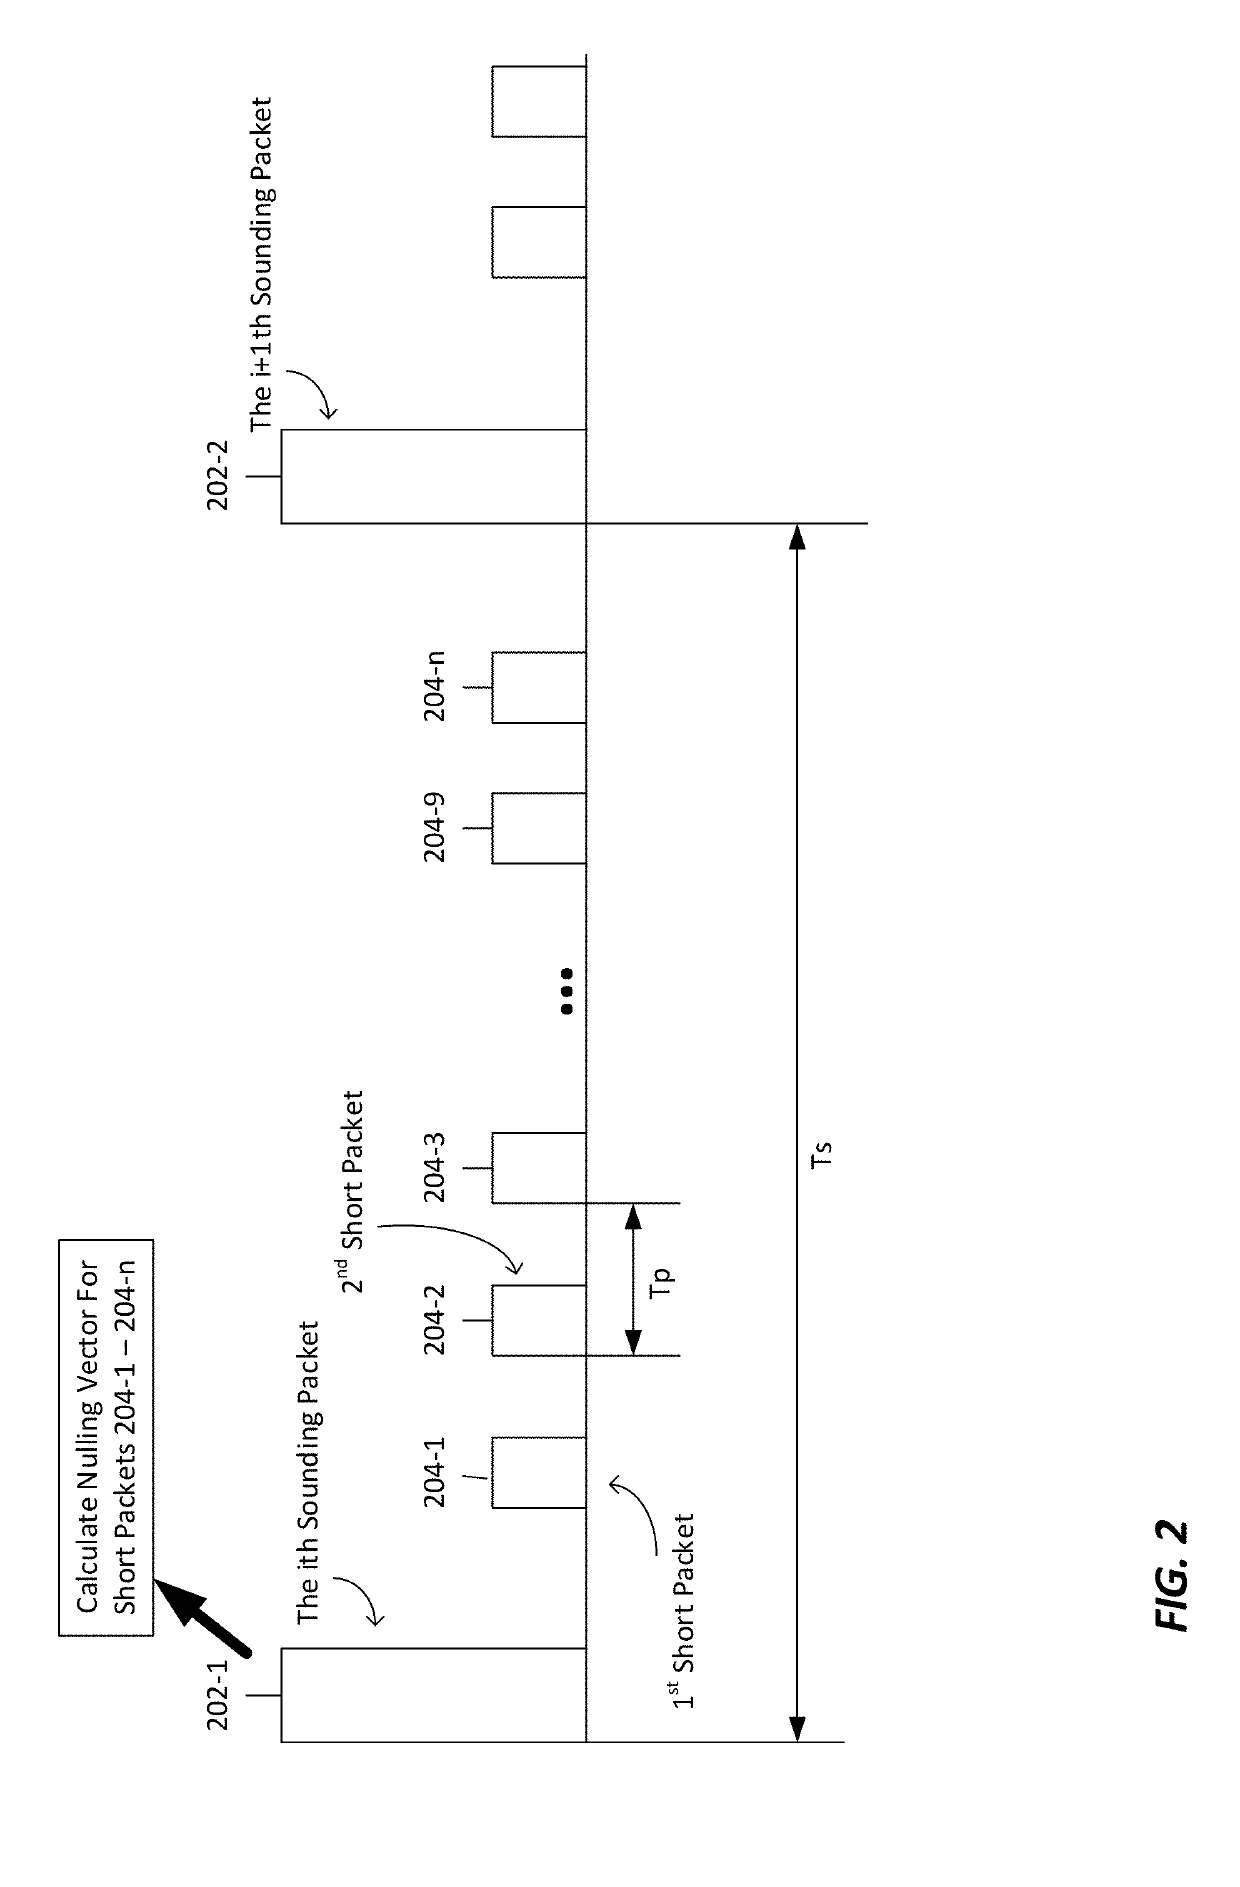 Systems and methods for detecting motion using wireless communication signals